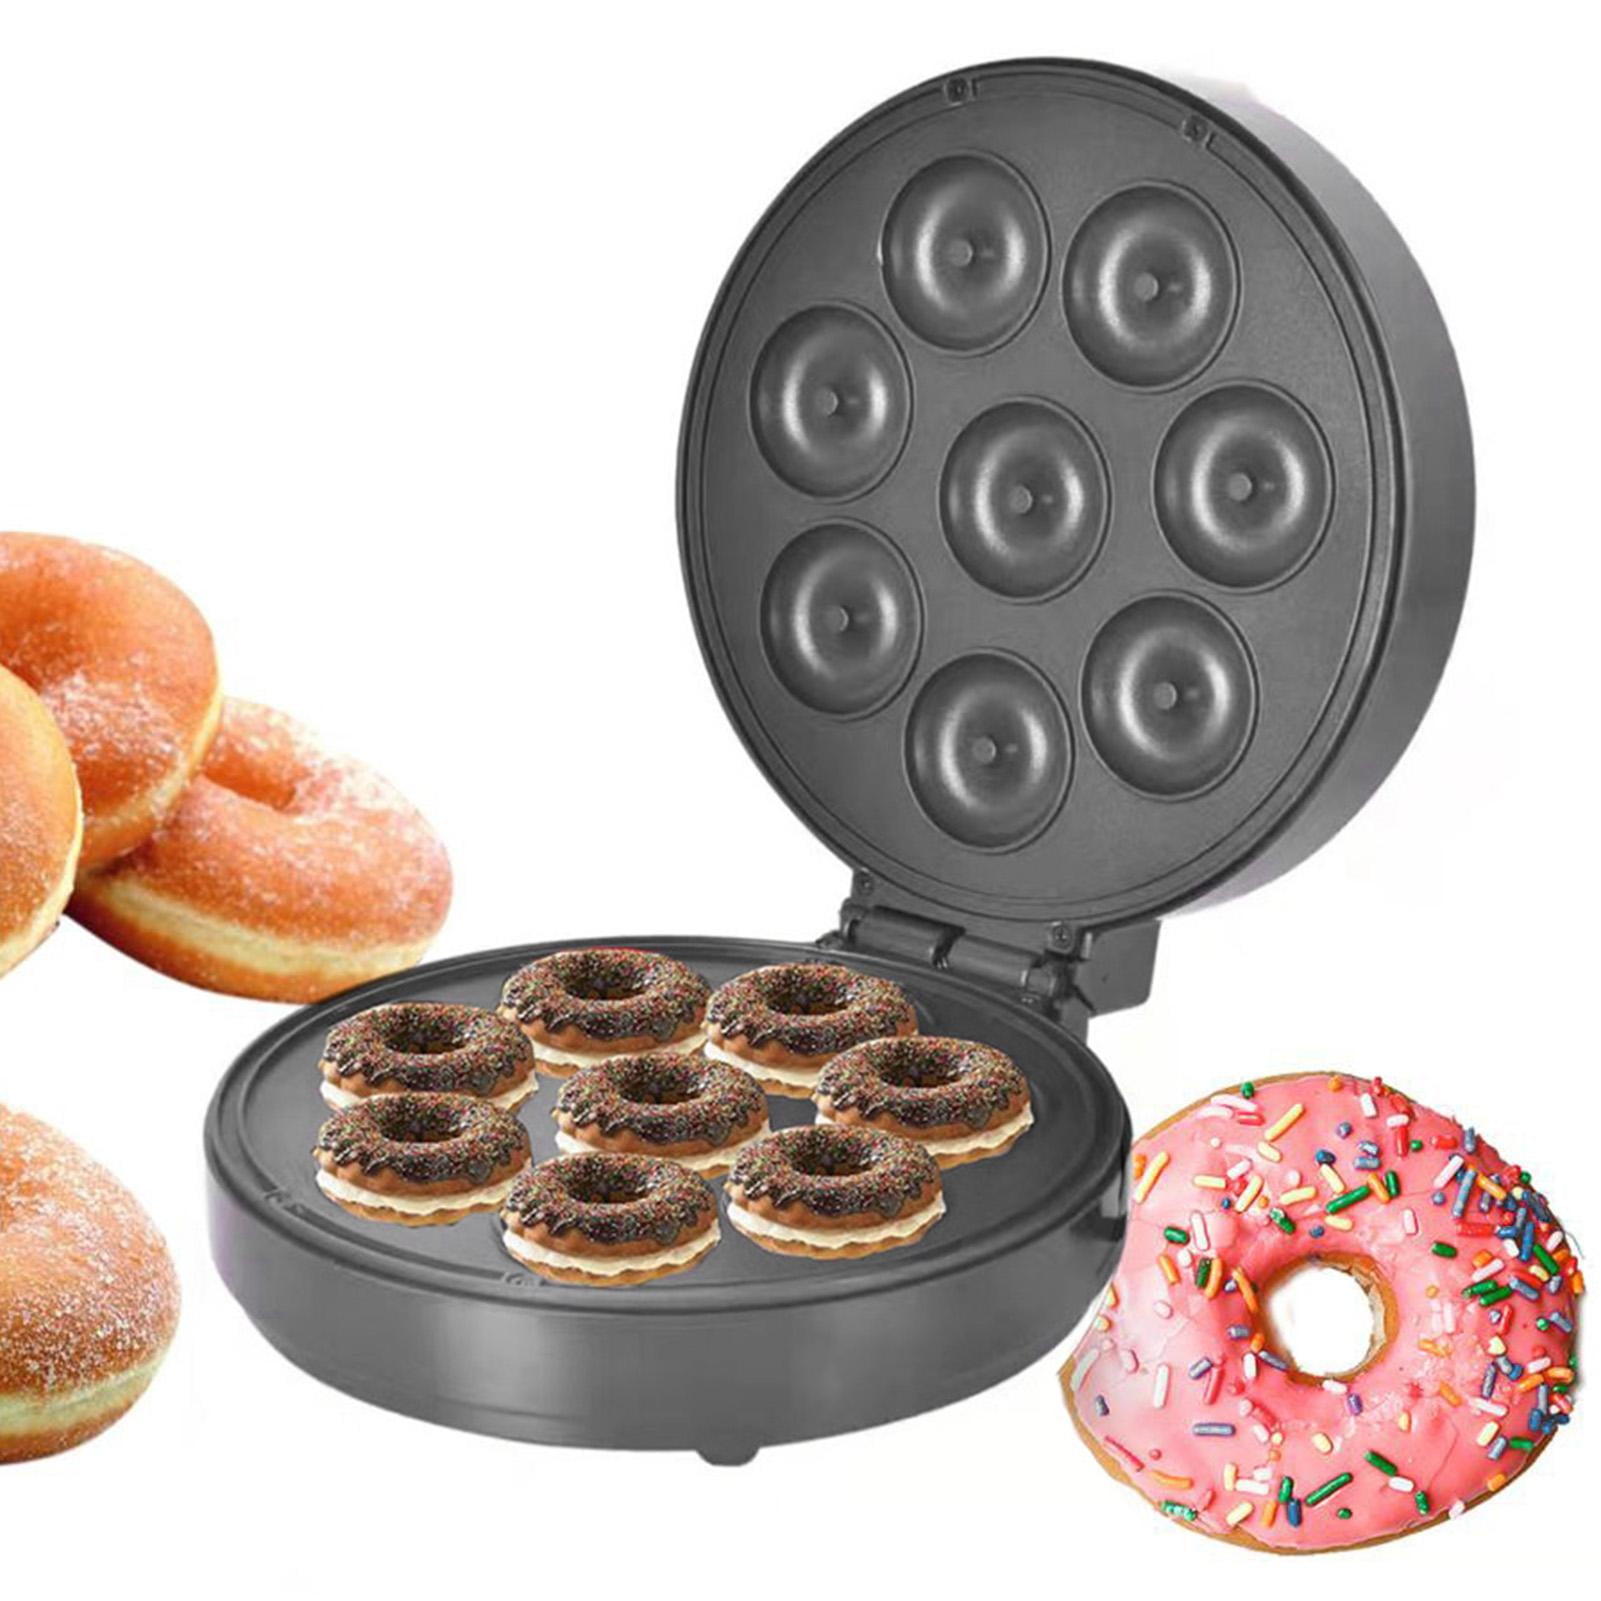 🍩 Personal Donut Maker✨️ @DASH ✨️ Dona Personal 🍩 #fyp #parati #cake, personal donut maker